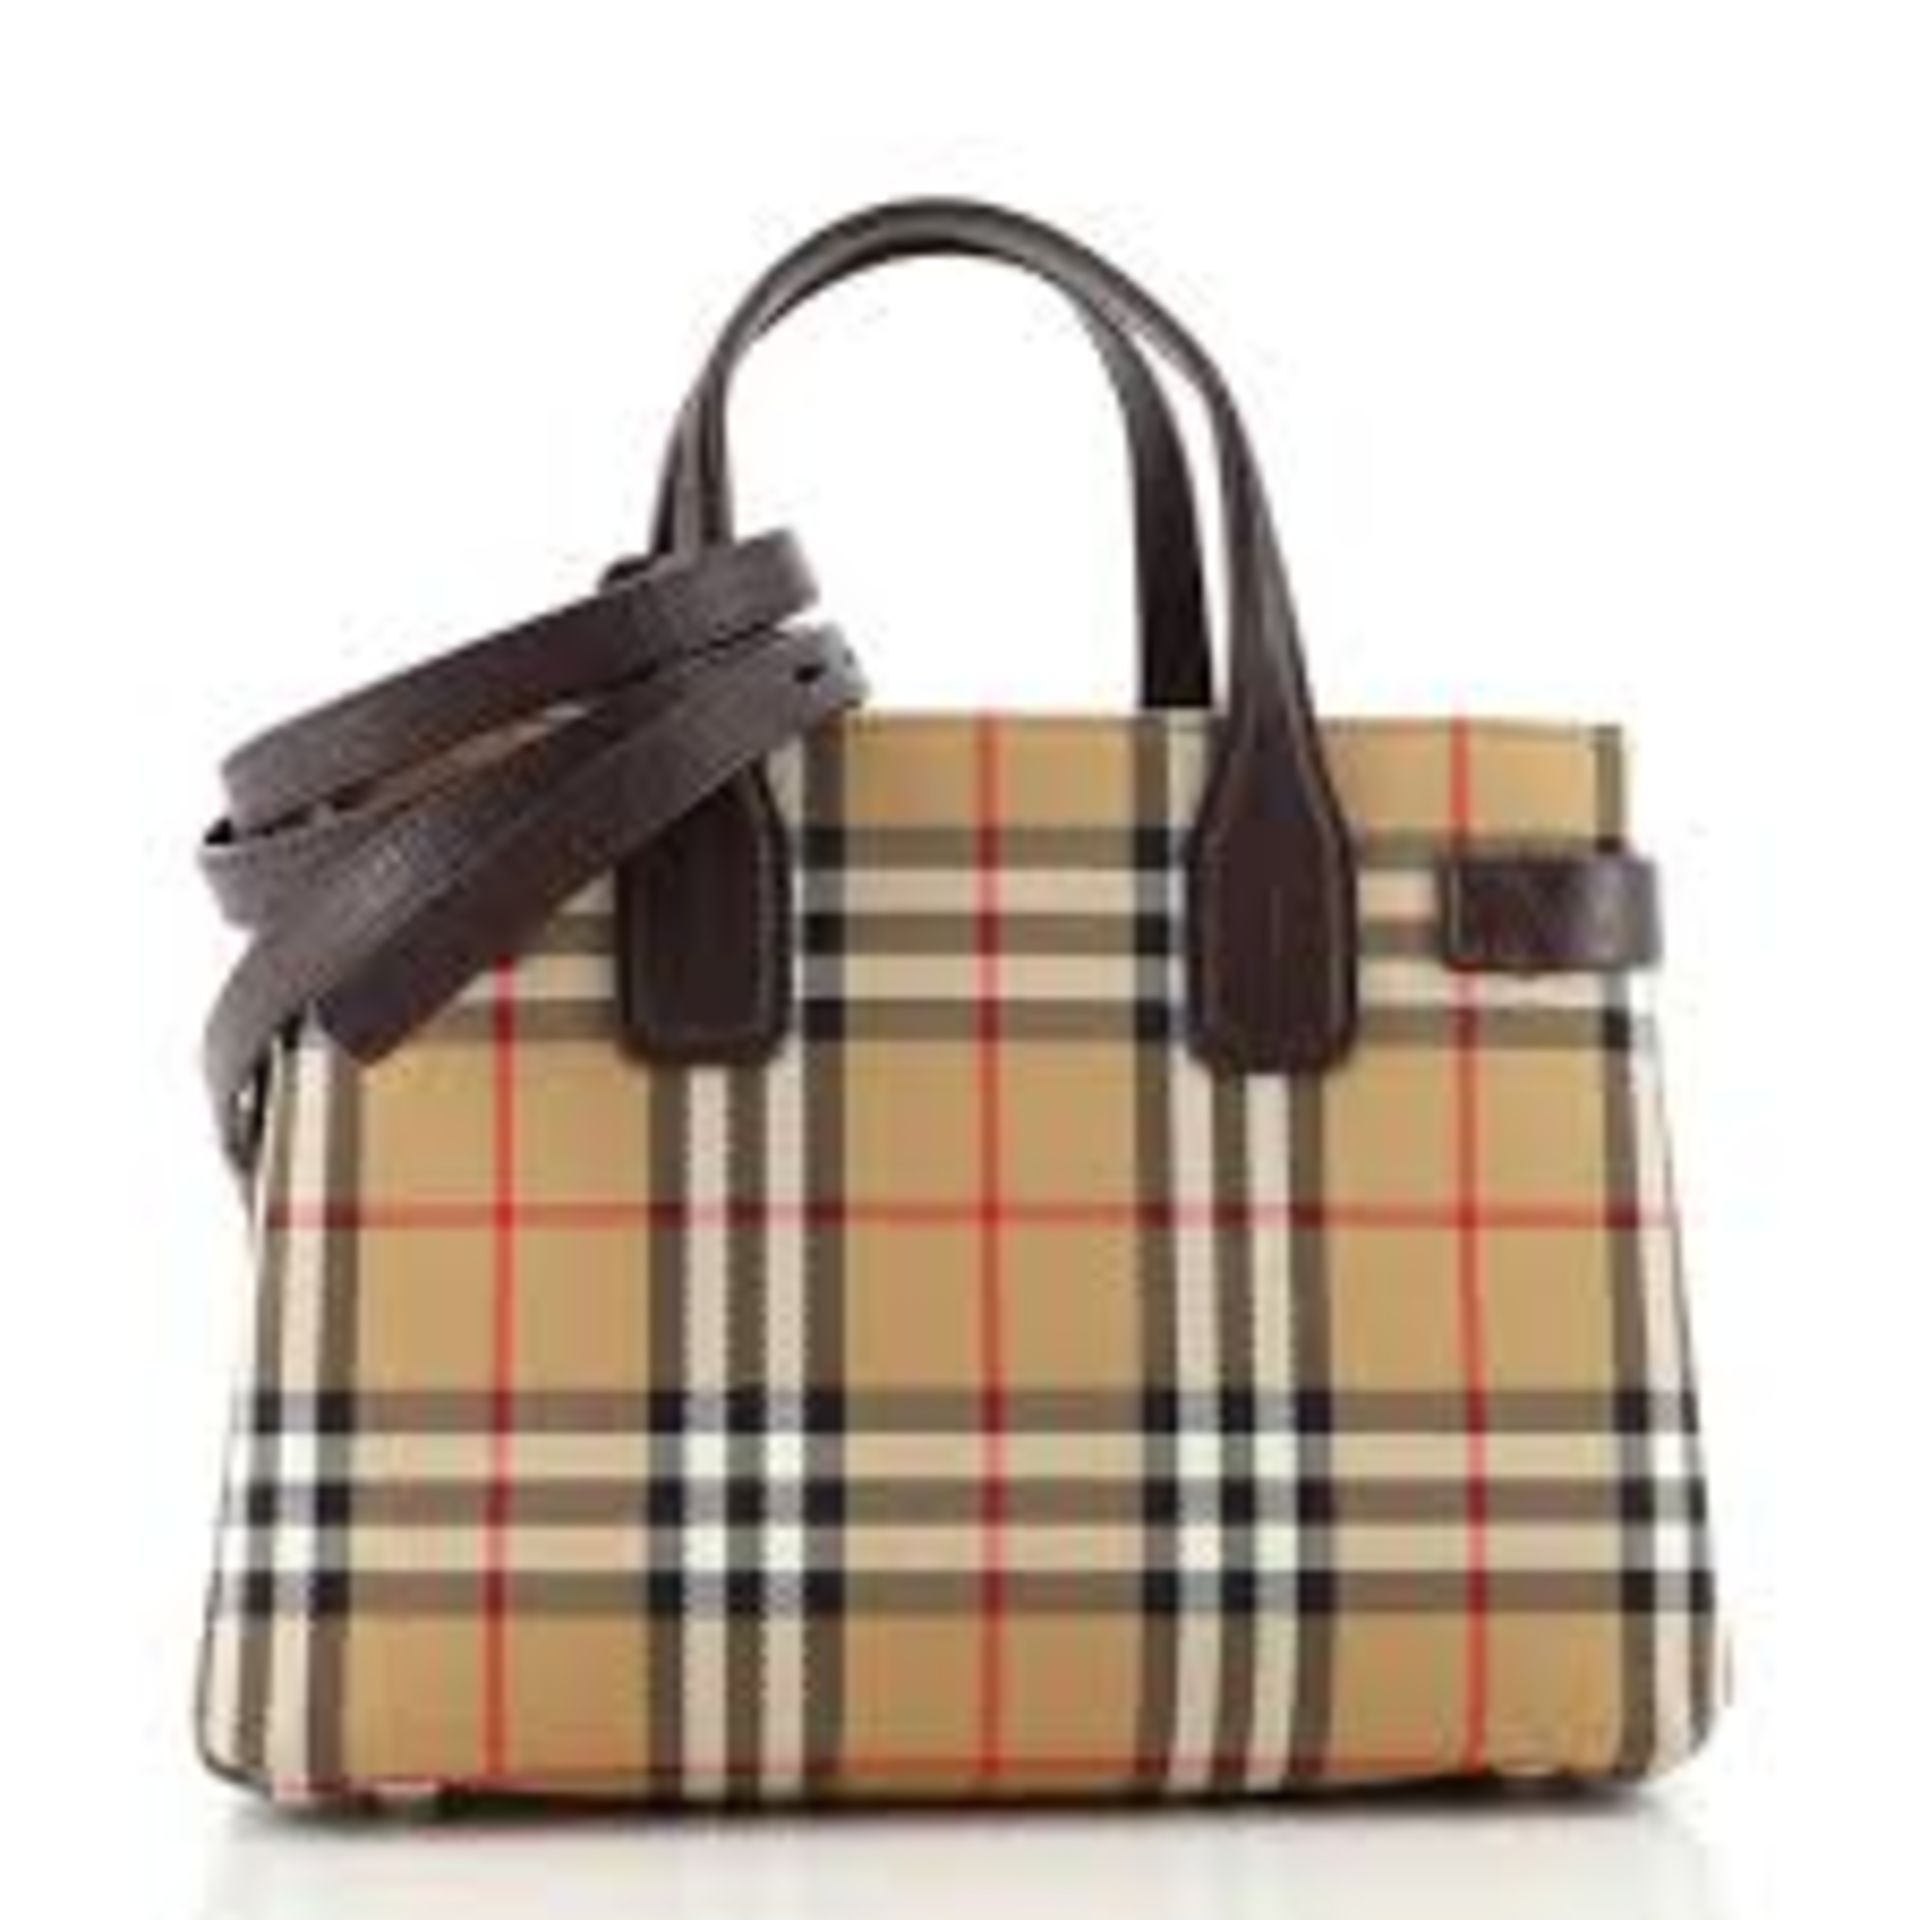 Burberry House Check Banner Tote Bag. 28x20cm. - Image 2 of 8